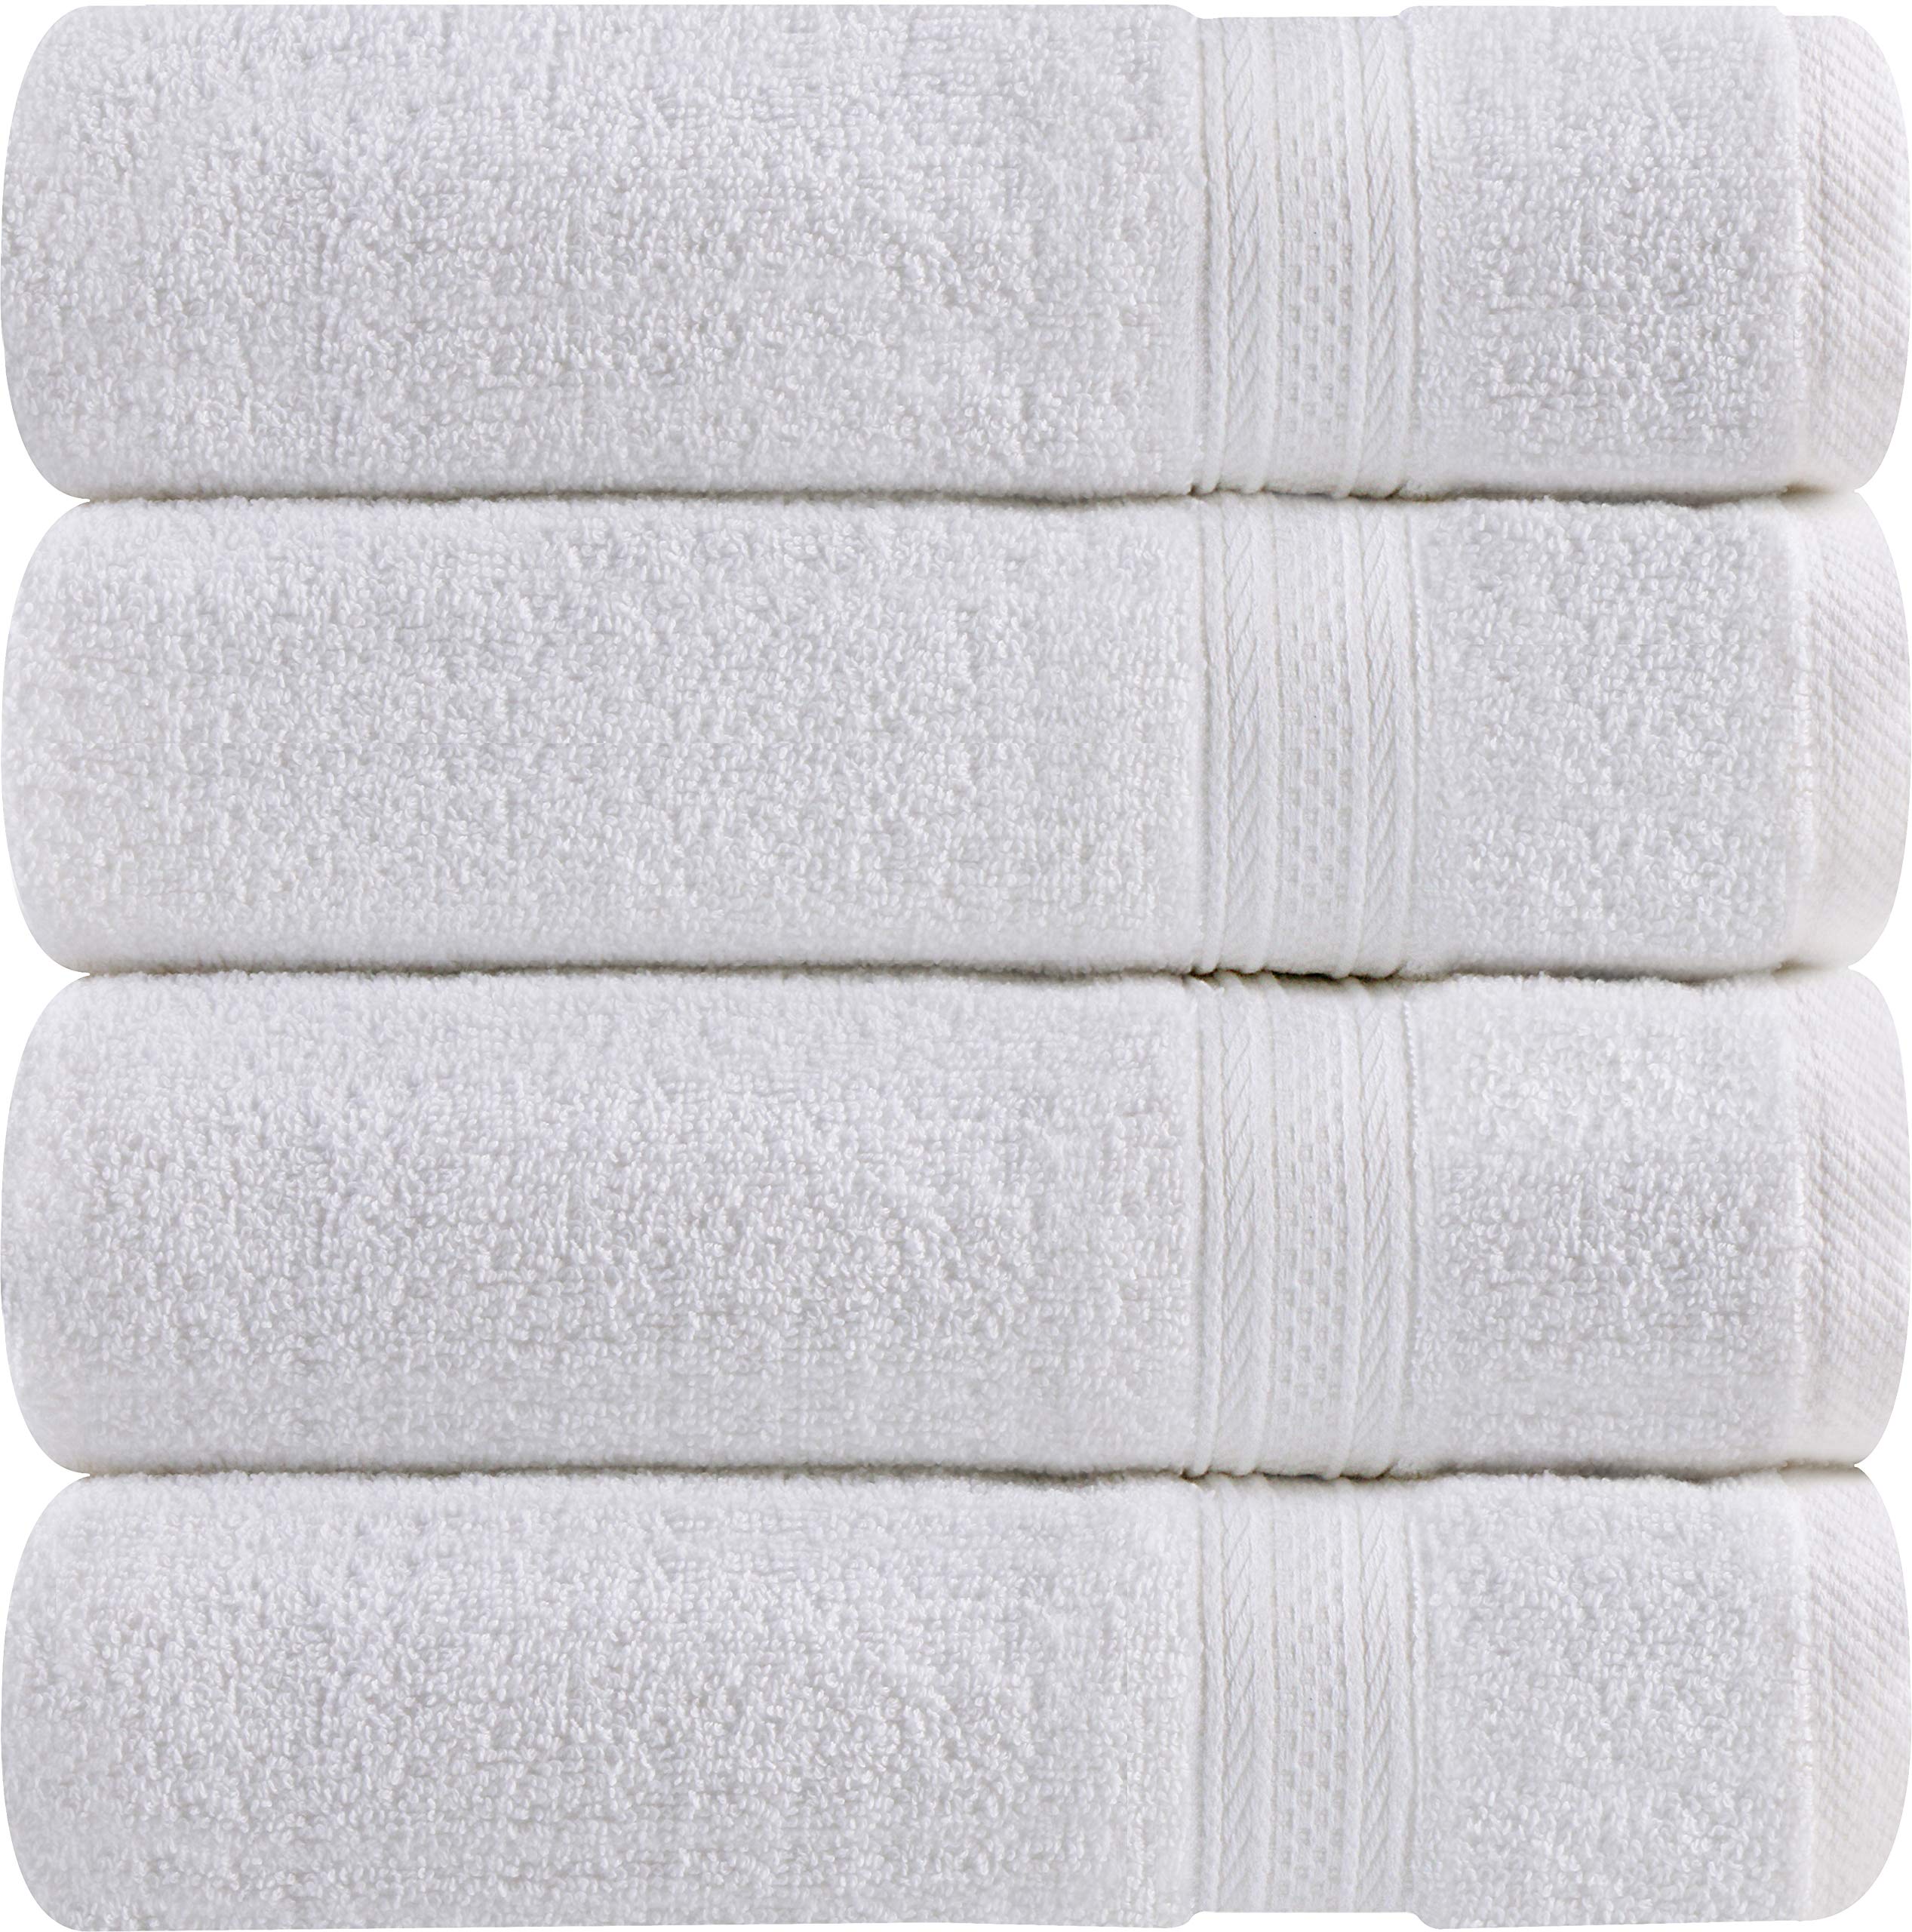 Book Cover Utopia Towels Premium White Hand Towels - 100% Combed Ring Spun Cotton, Ultra Soft and Highly Absorbent, 700 GSM Exrta Large Thick Hand Towels 16 x 28 inches, Hotel & Spa Quality Hand Towels (4-Pack)